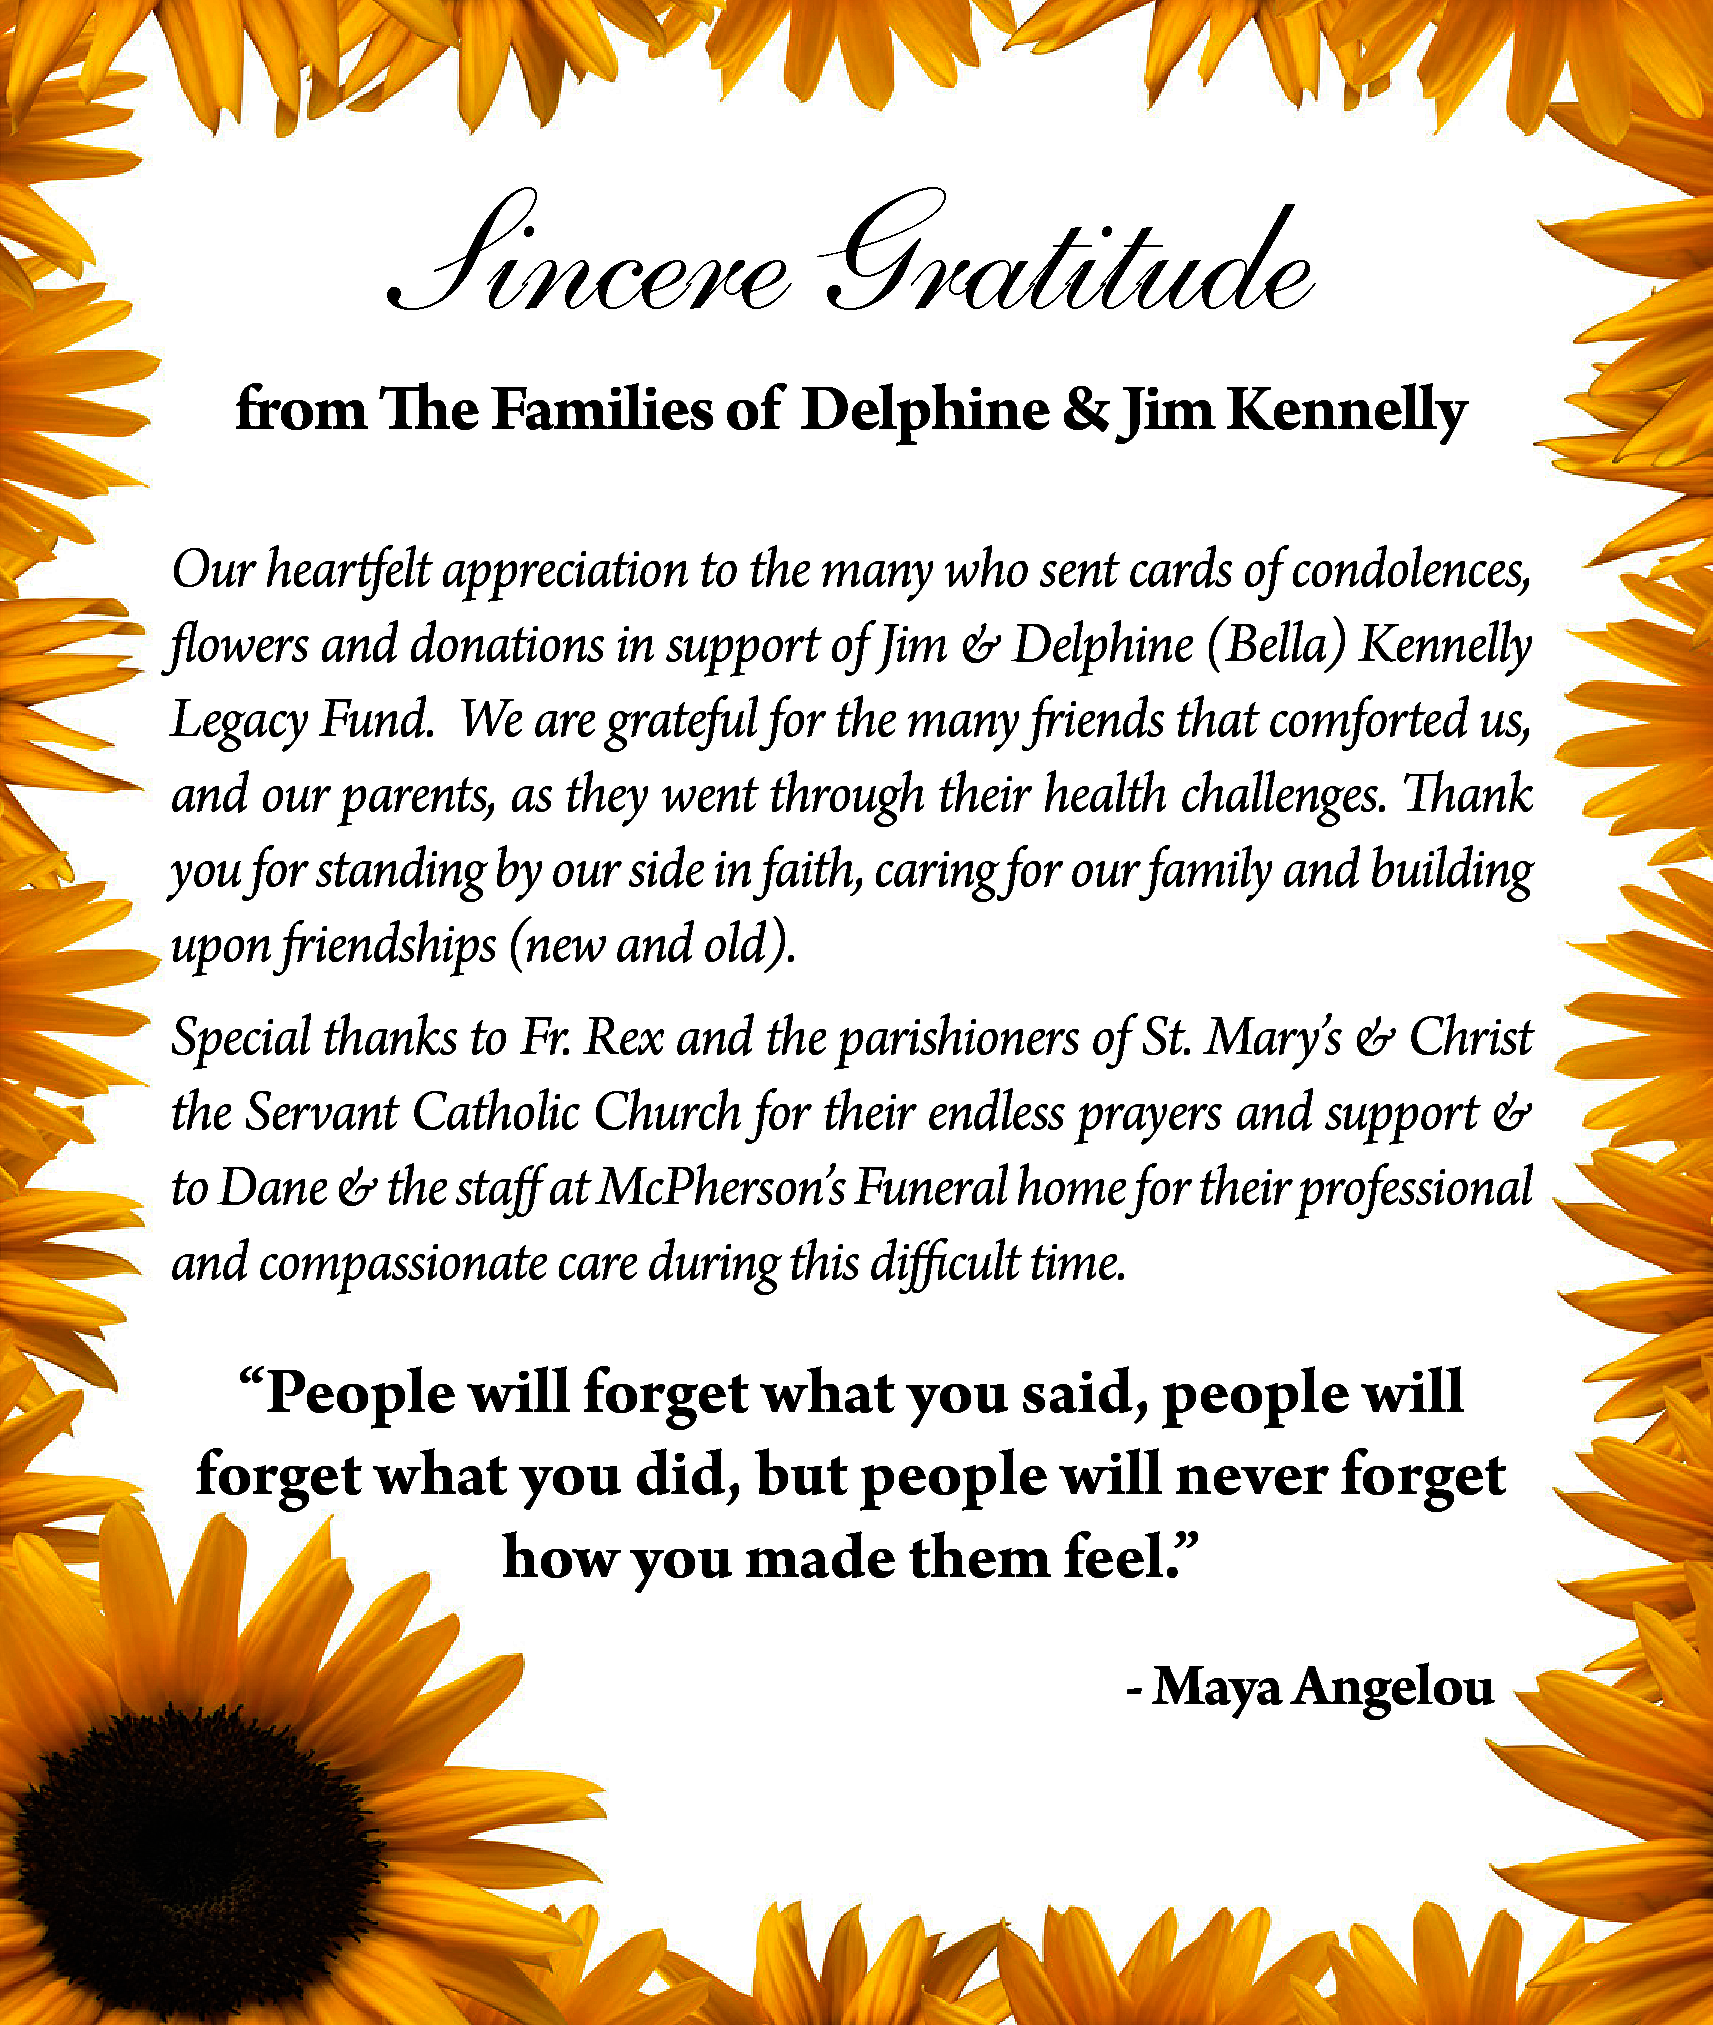 Sincere Gratitude <br>from The Families  Sincere Gratitude  from The Families of Delphine & Jim Kennelly  Our heartfelt appreciation to the many who sent cards of condolences,  flowers and donations in support of Jim & Delphine (Bella) Kennelly  Legacy Fund. We are grateful for the many friends that comforted us,  and our parents, as they went through their health challenges. Thank  you for standing by our side in faith, caring for our family and building  upon friendships (new and old).  Special thanks to Fr. Rex and the parishioners of St. Mary’s & Christ  the Servant Catholic Church for their endless prayers and support &  to Dane & the staff at McPherson’s Funeral home for their professional  and compassionate care during this difficult time.    “People will forget what you said, people will  forget what you did, but people will never forget  how you made them feel.”  - Maya Angelou    